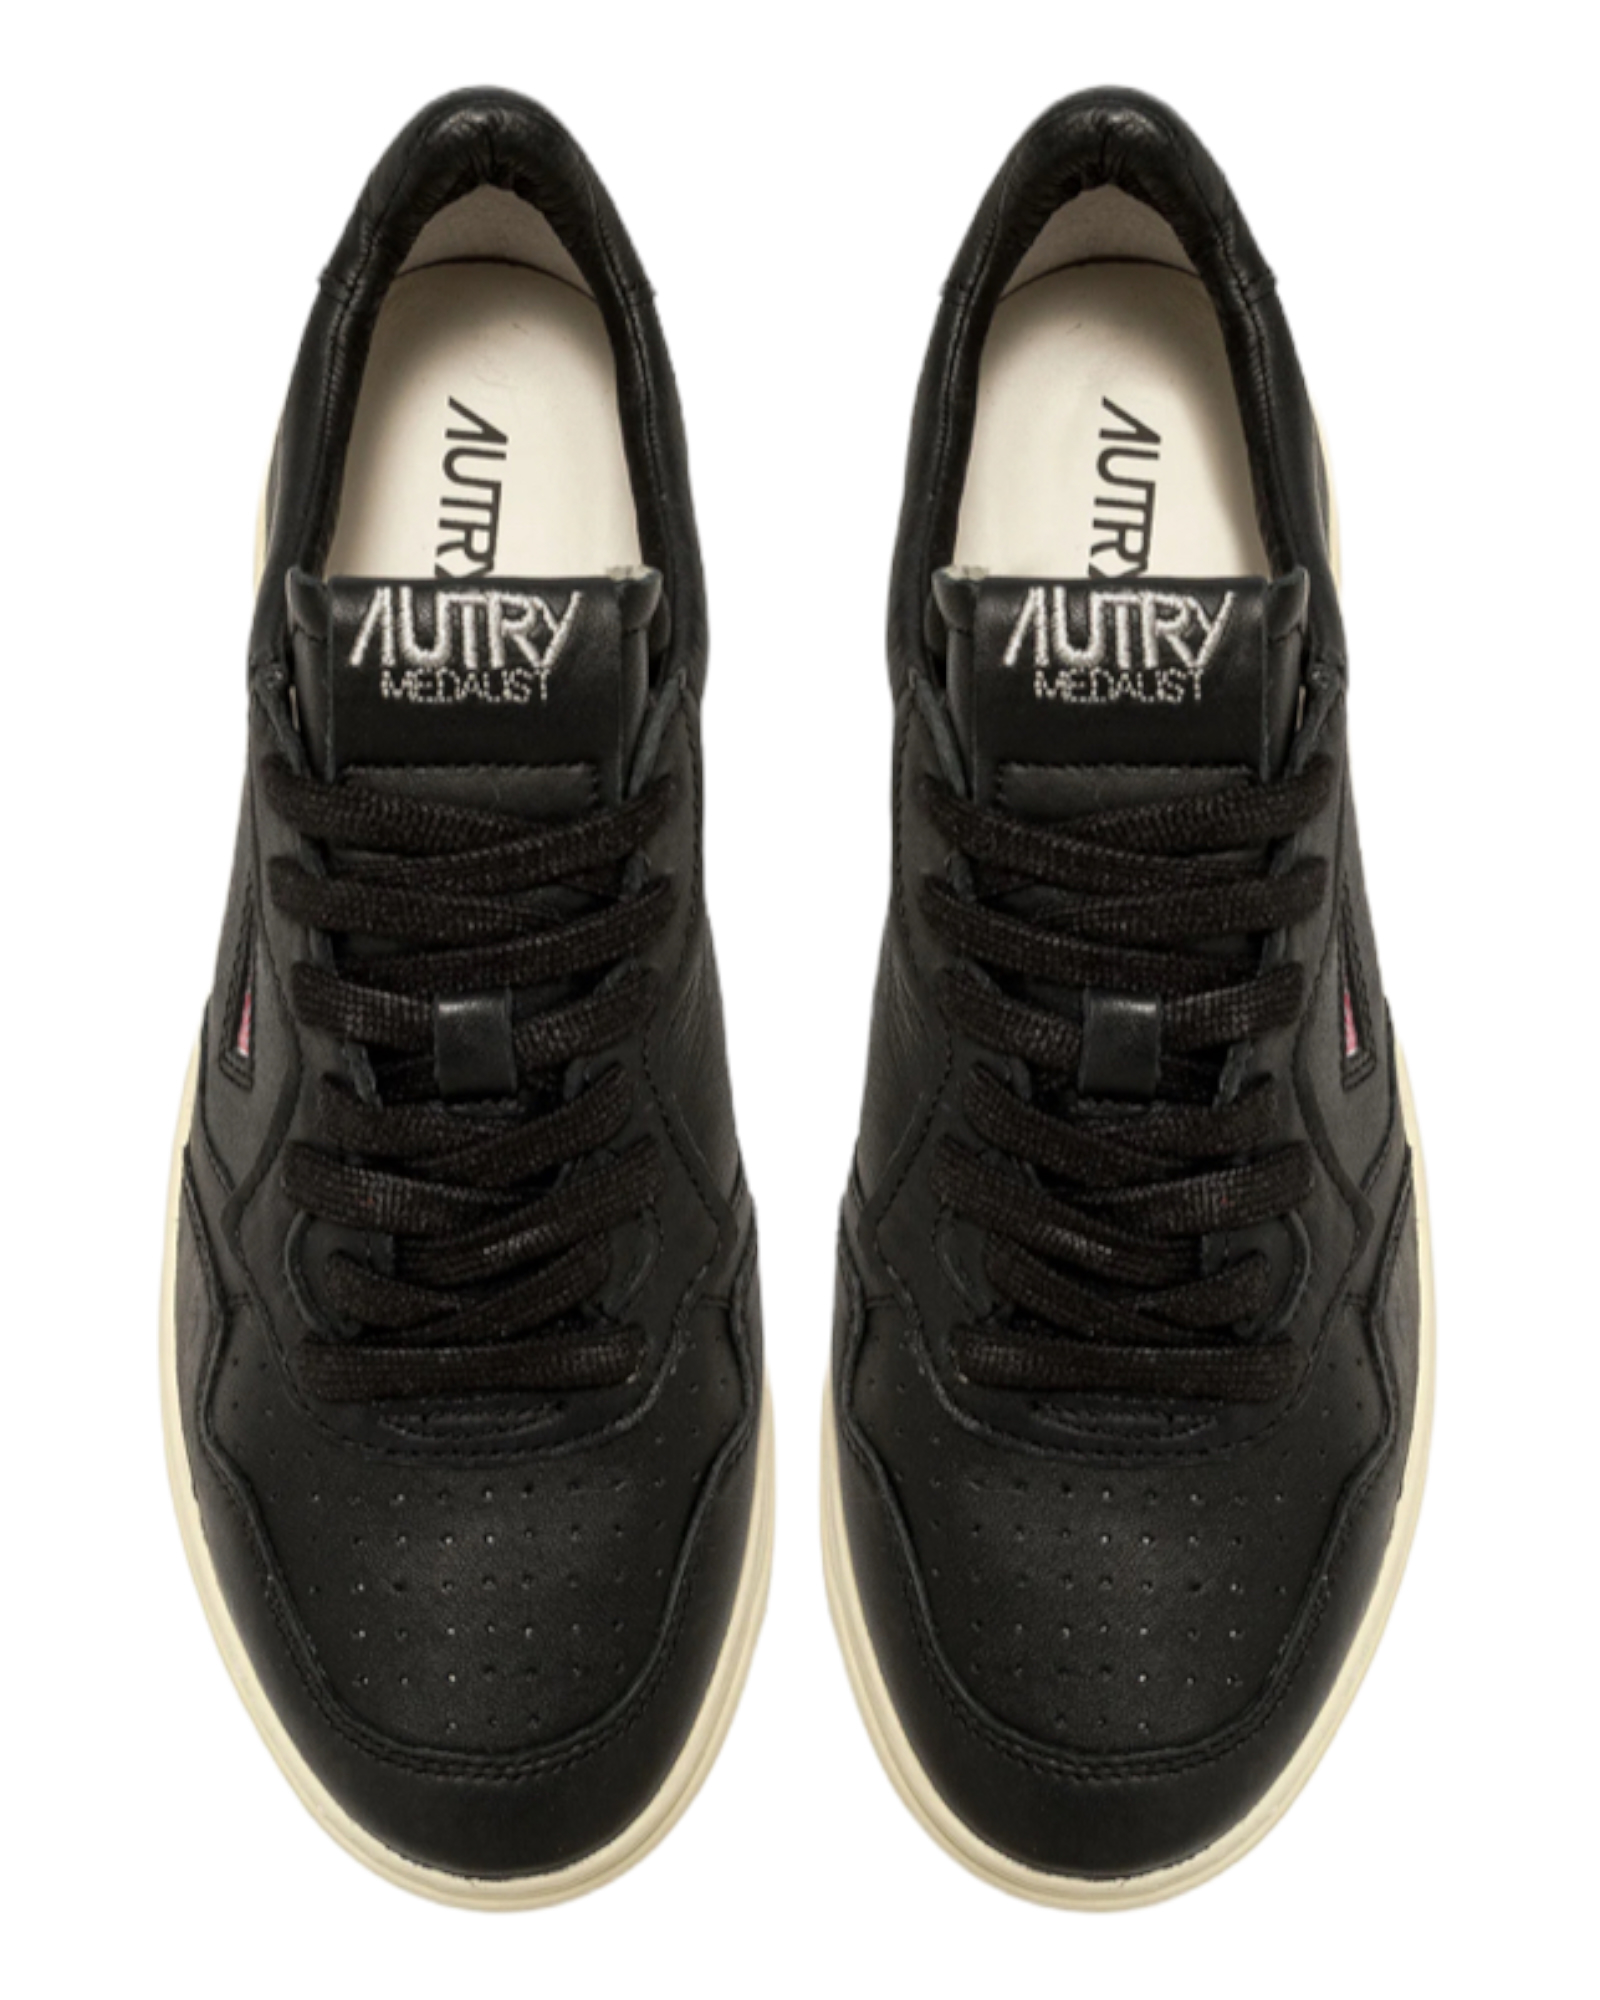 Medalist, Low Sneakers, Autry, AULM GG05